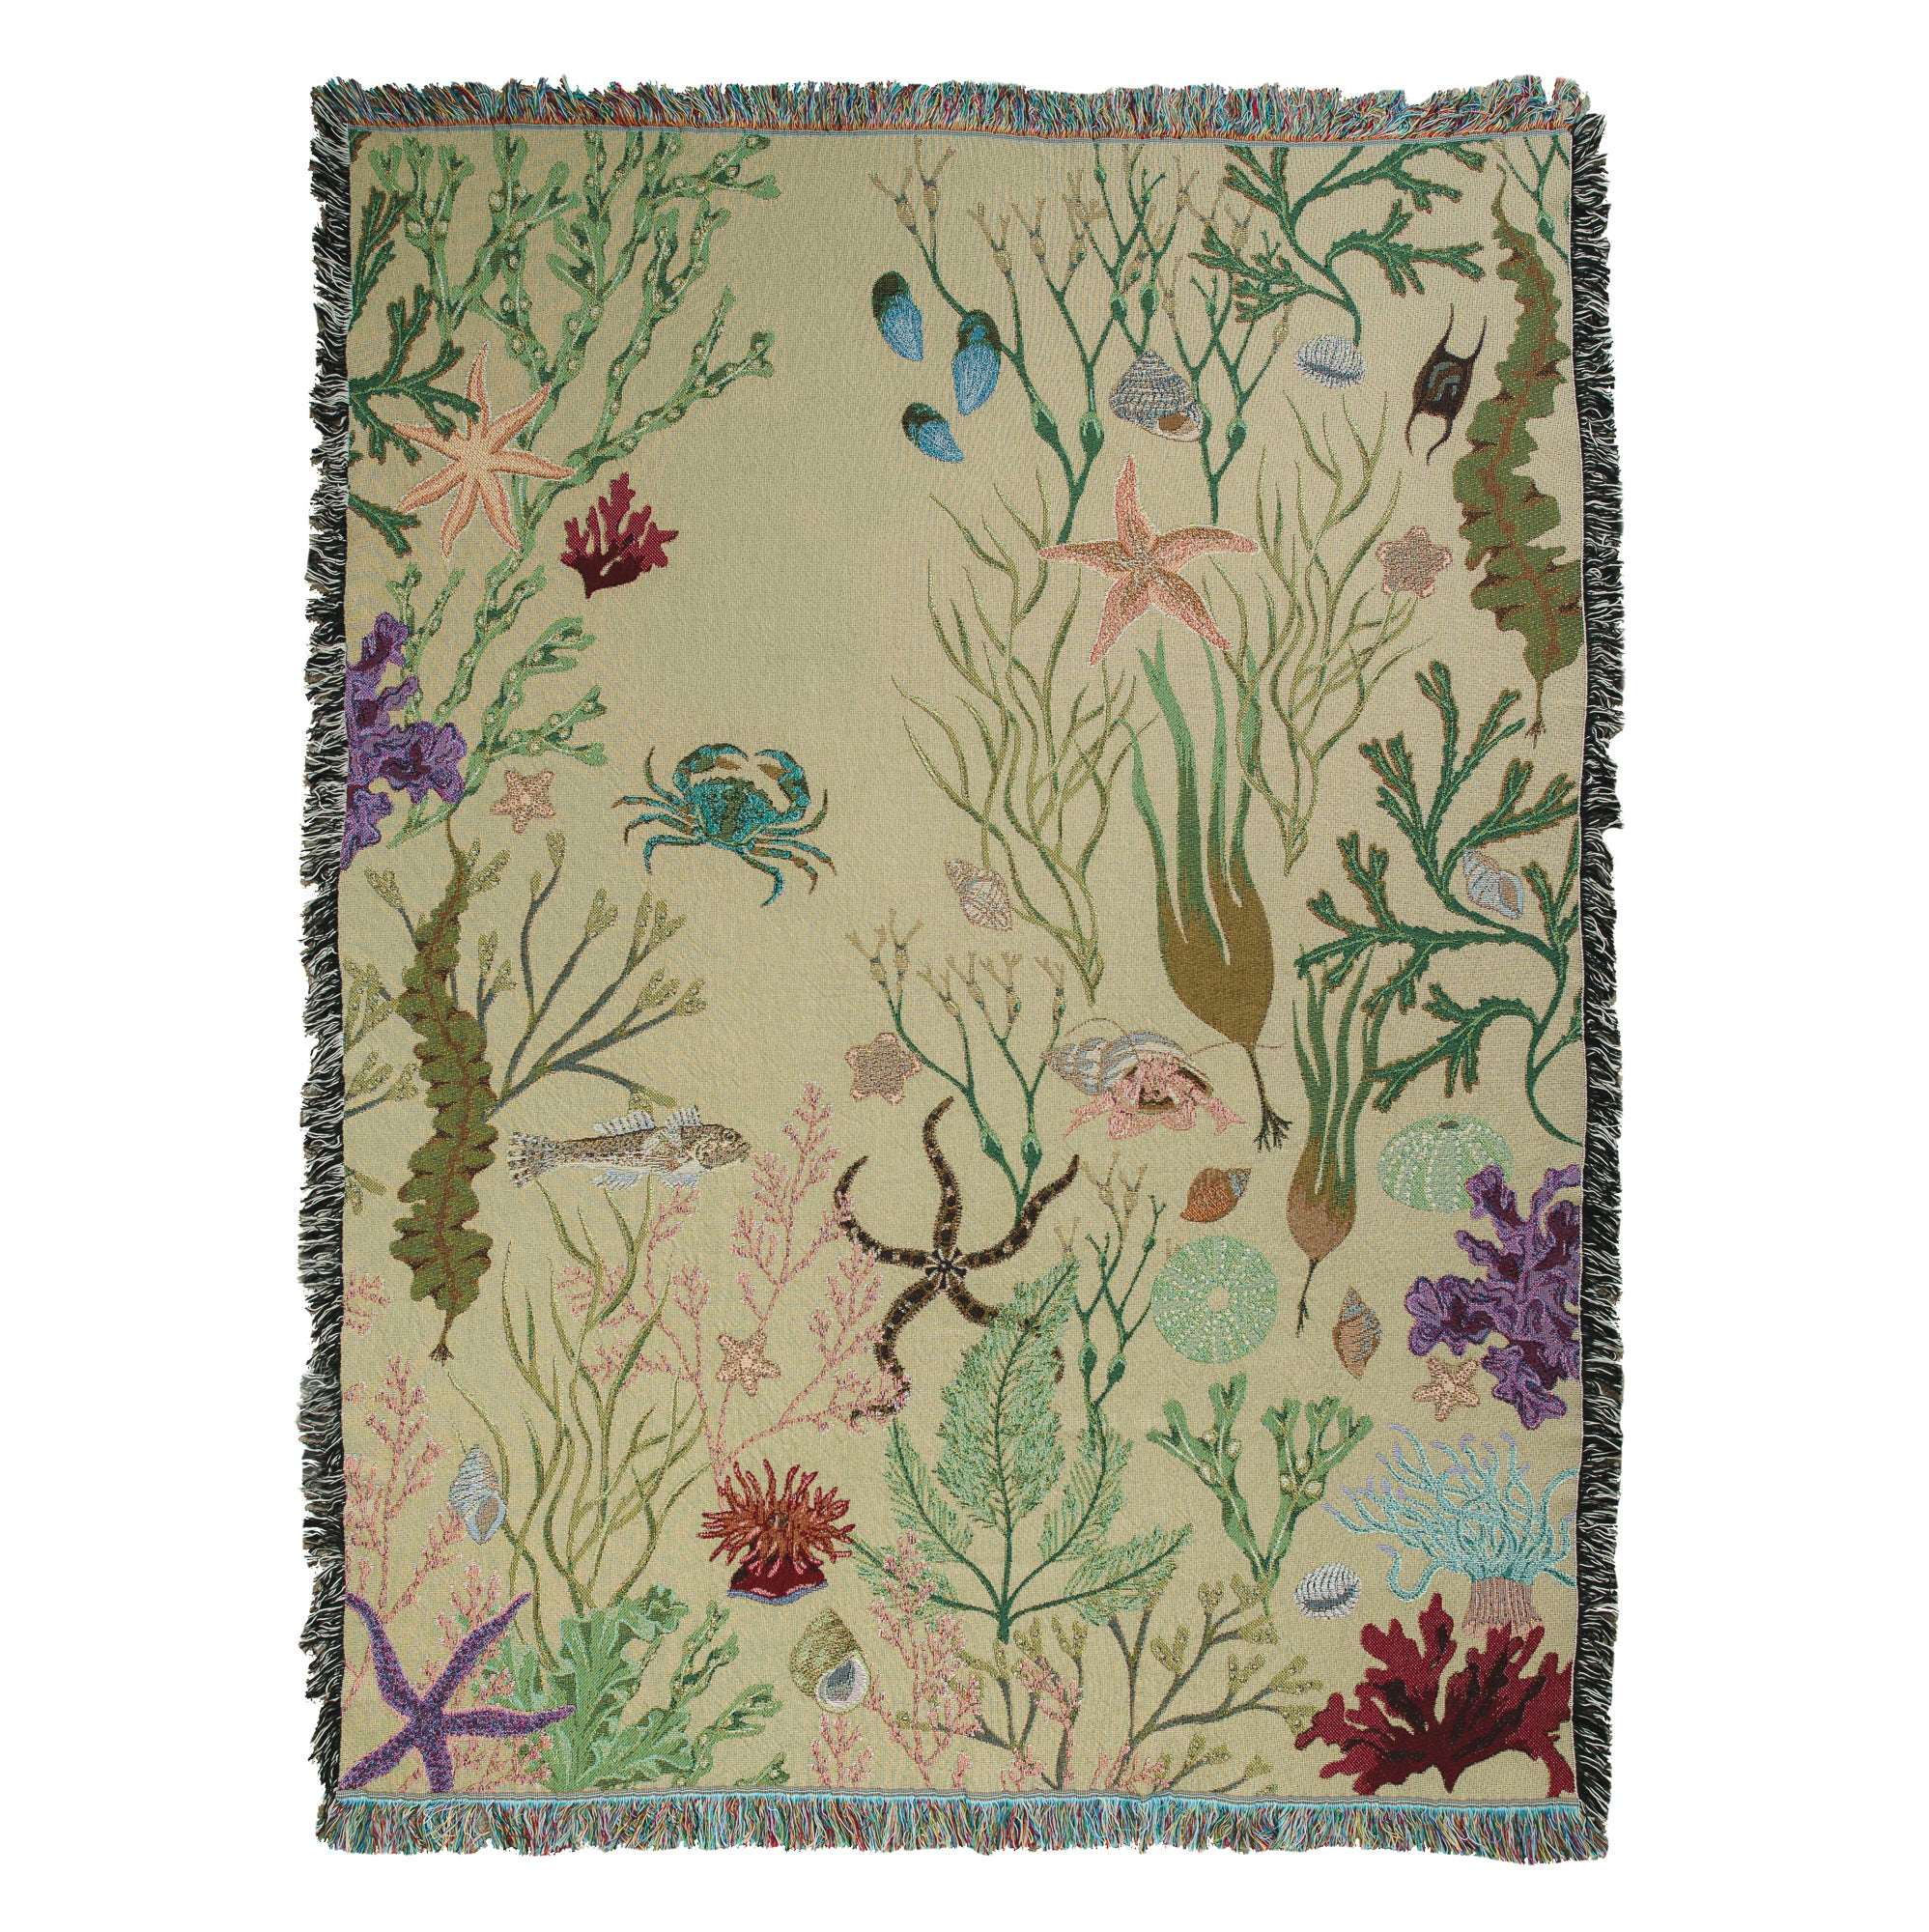 an &quot;Intertidal Sand blanket&quot; by Arcana with crabs, starfish and seaweed on it.